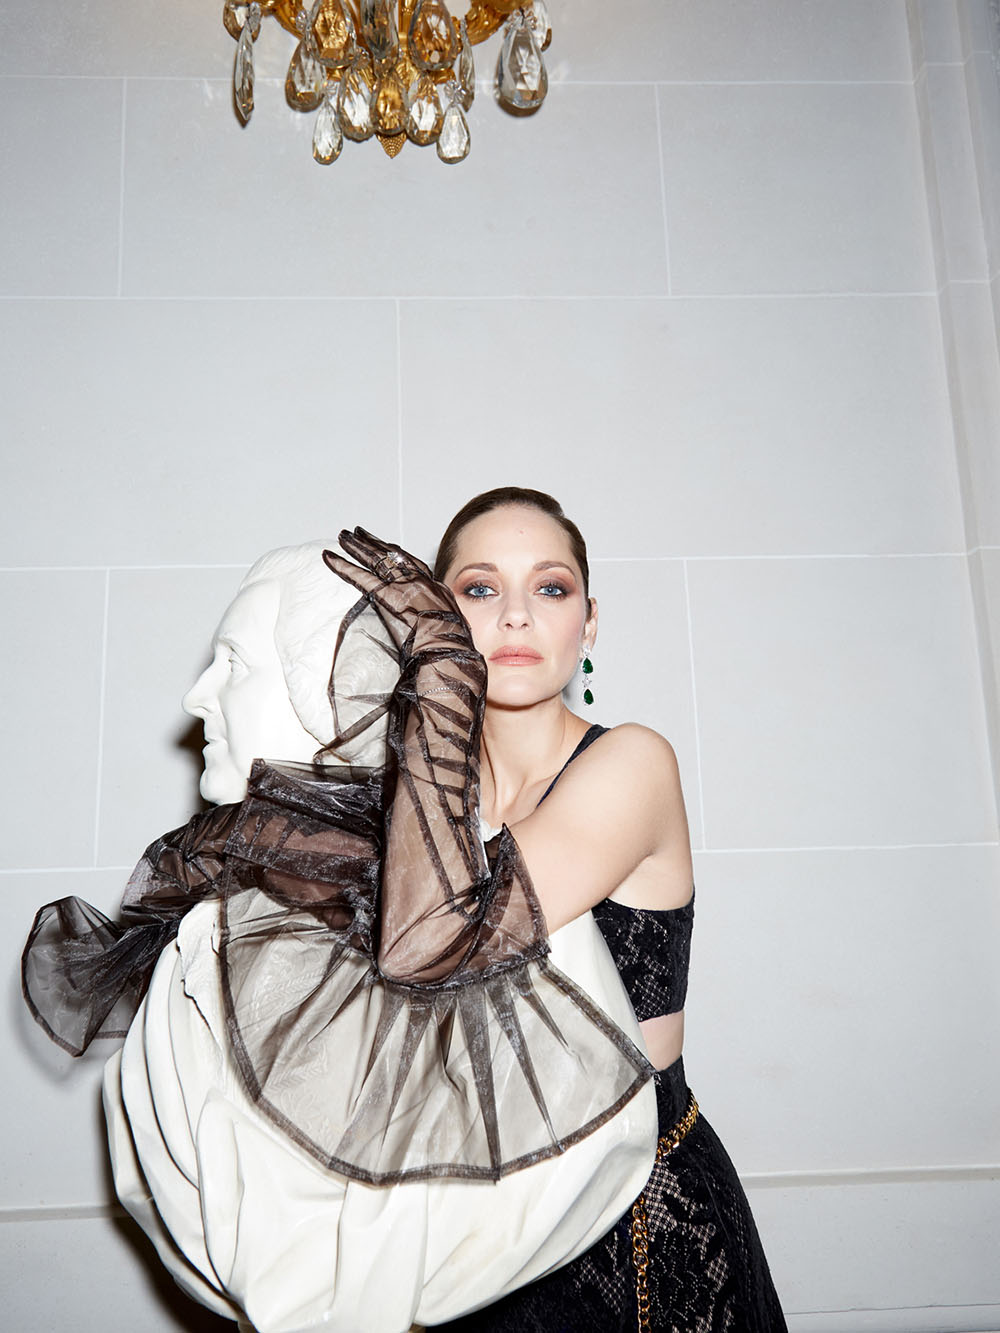 Marion Cotillard covers Harper’s Bazaar Russia November 2020 by Claire Rothstein